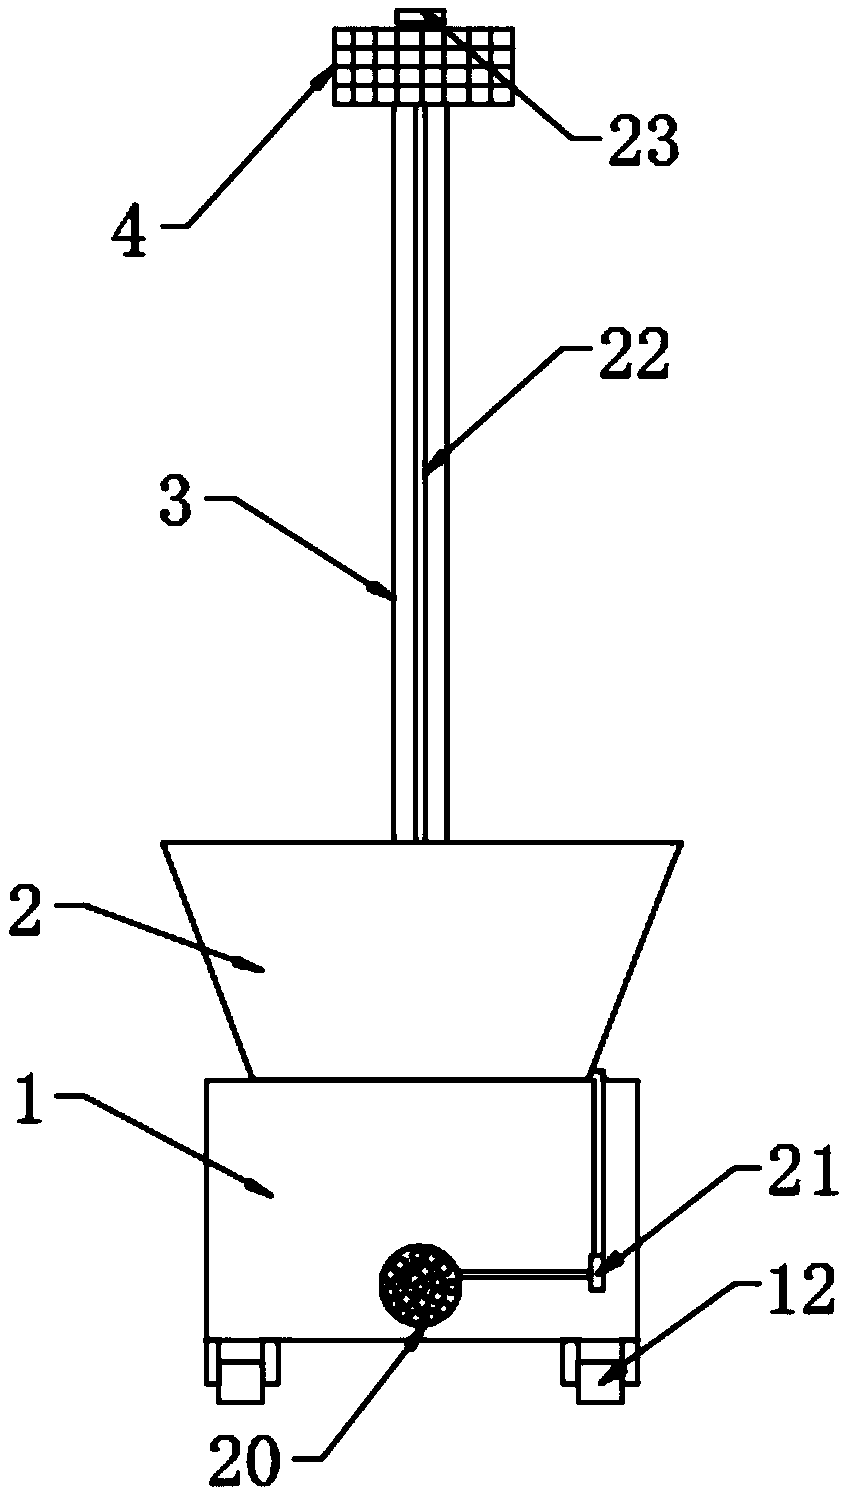 Solar street lamp with rainwater collecting device